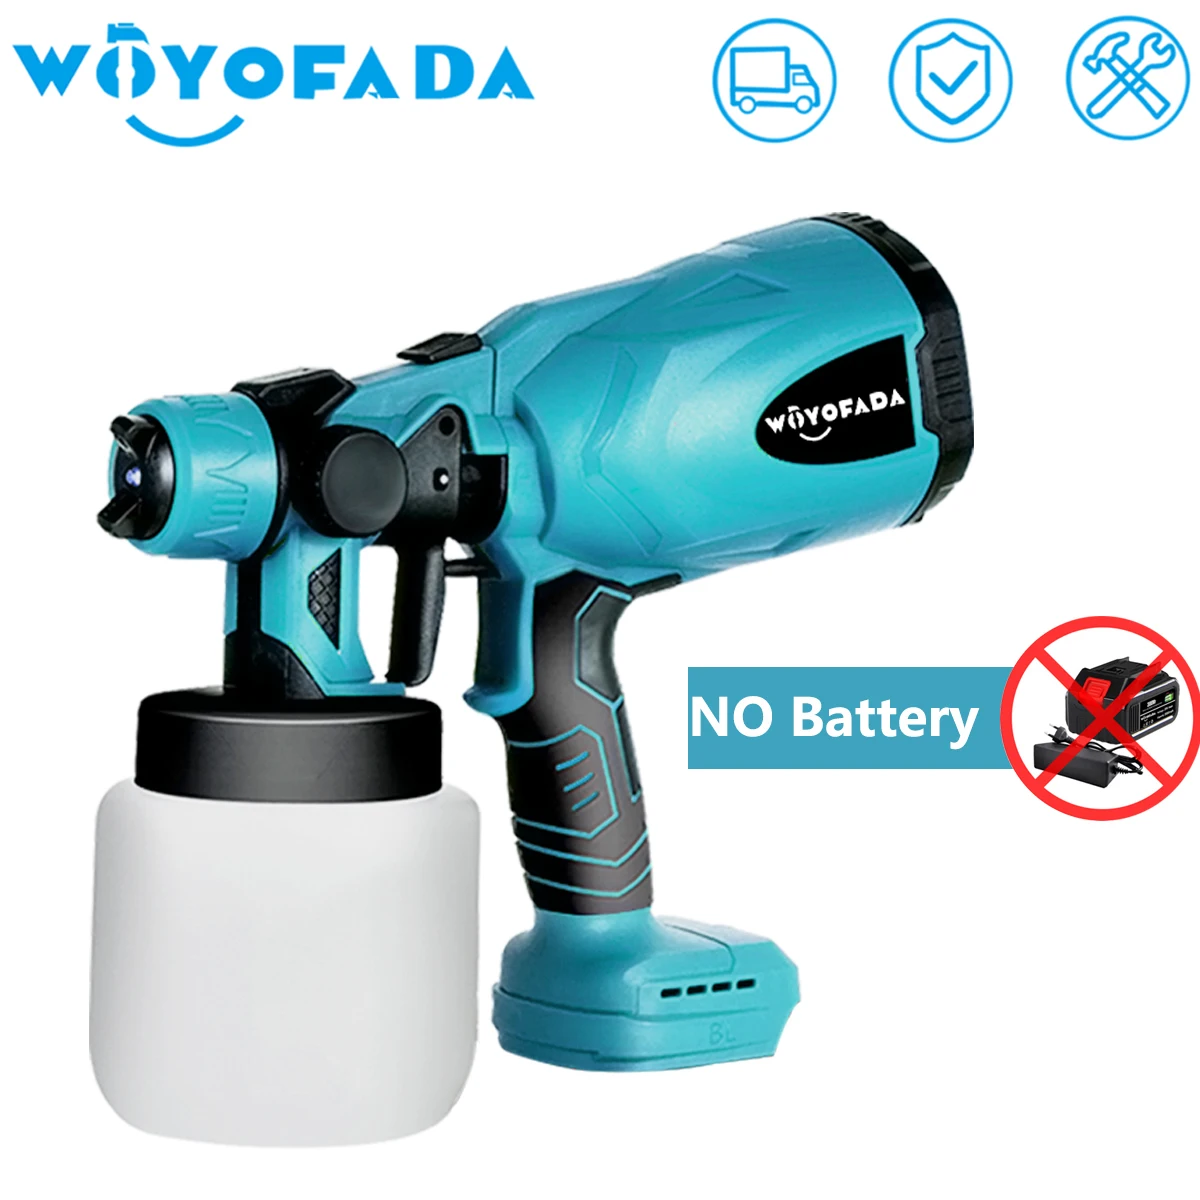 

Electric Cordless Paint Sprayer Gun for Wood Fence Furniture Cabinets Walls Fit Makita 18v Battery without Battery